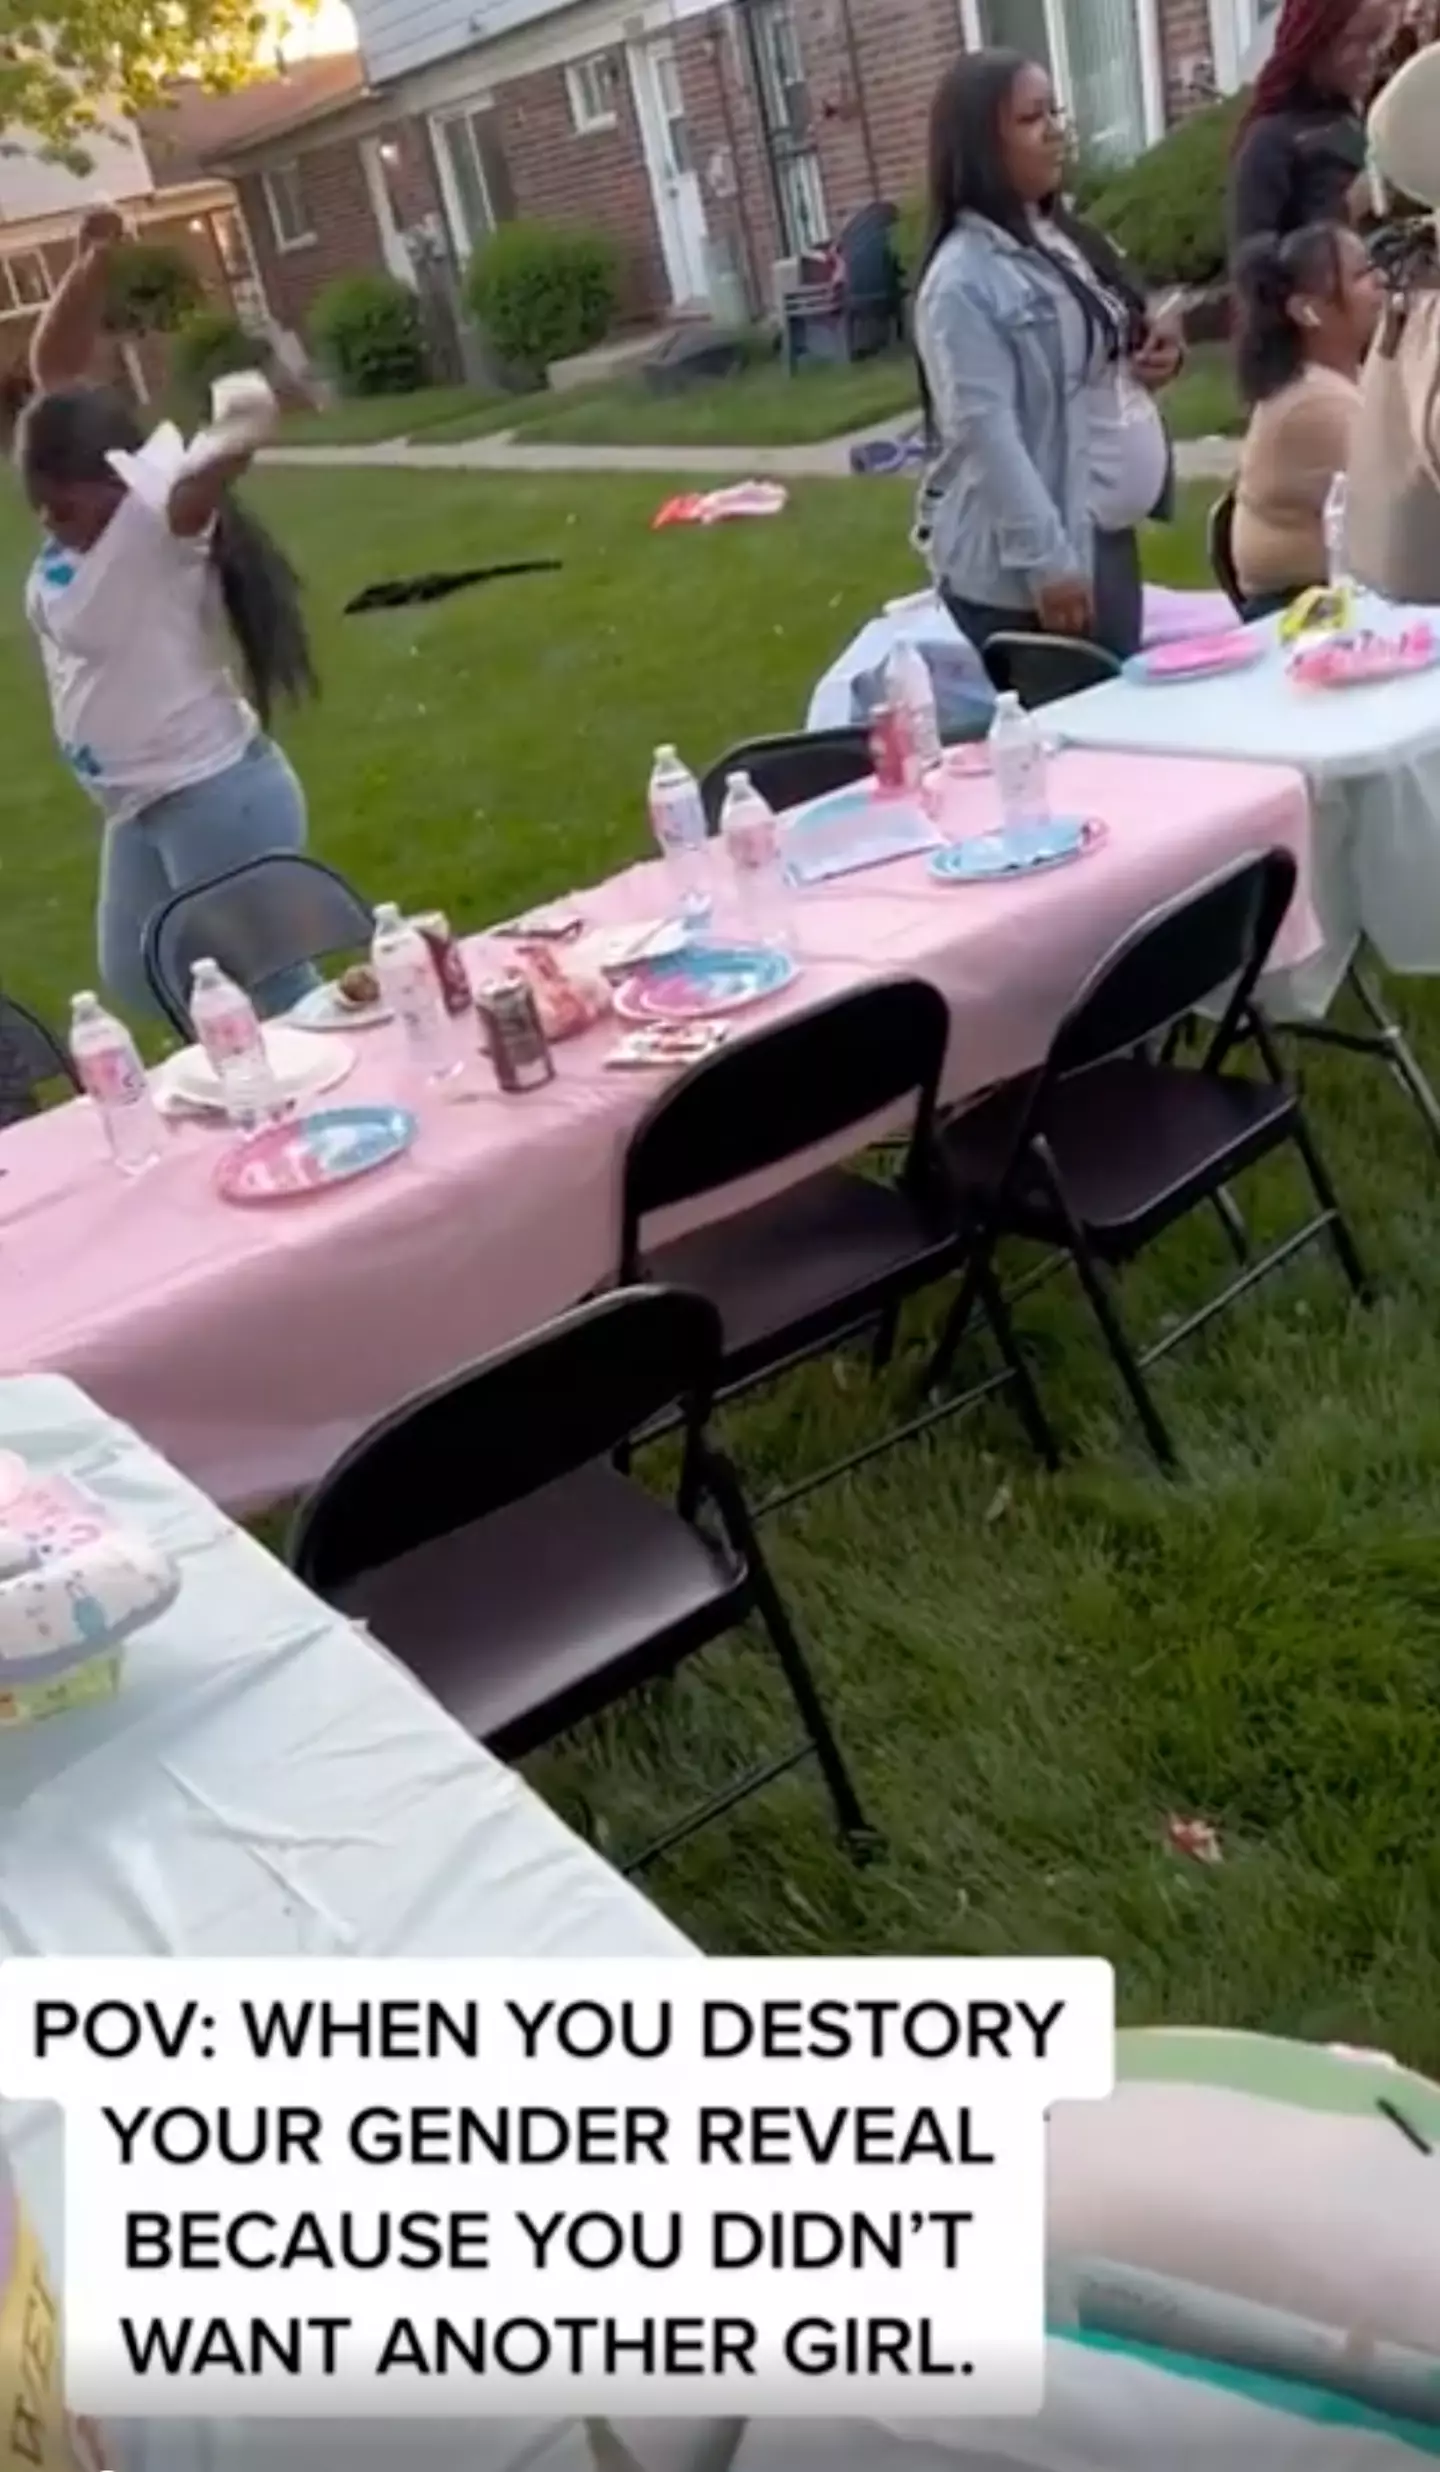 Some called having gender reveal parties into question.